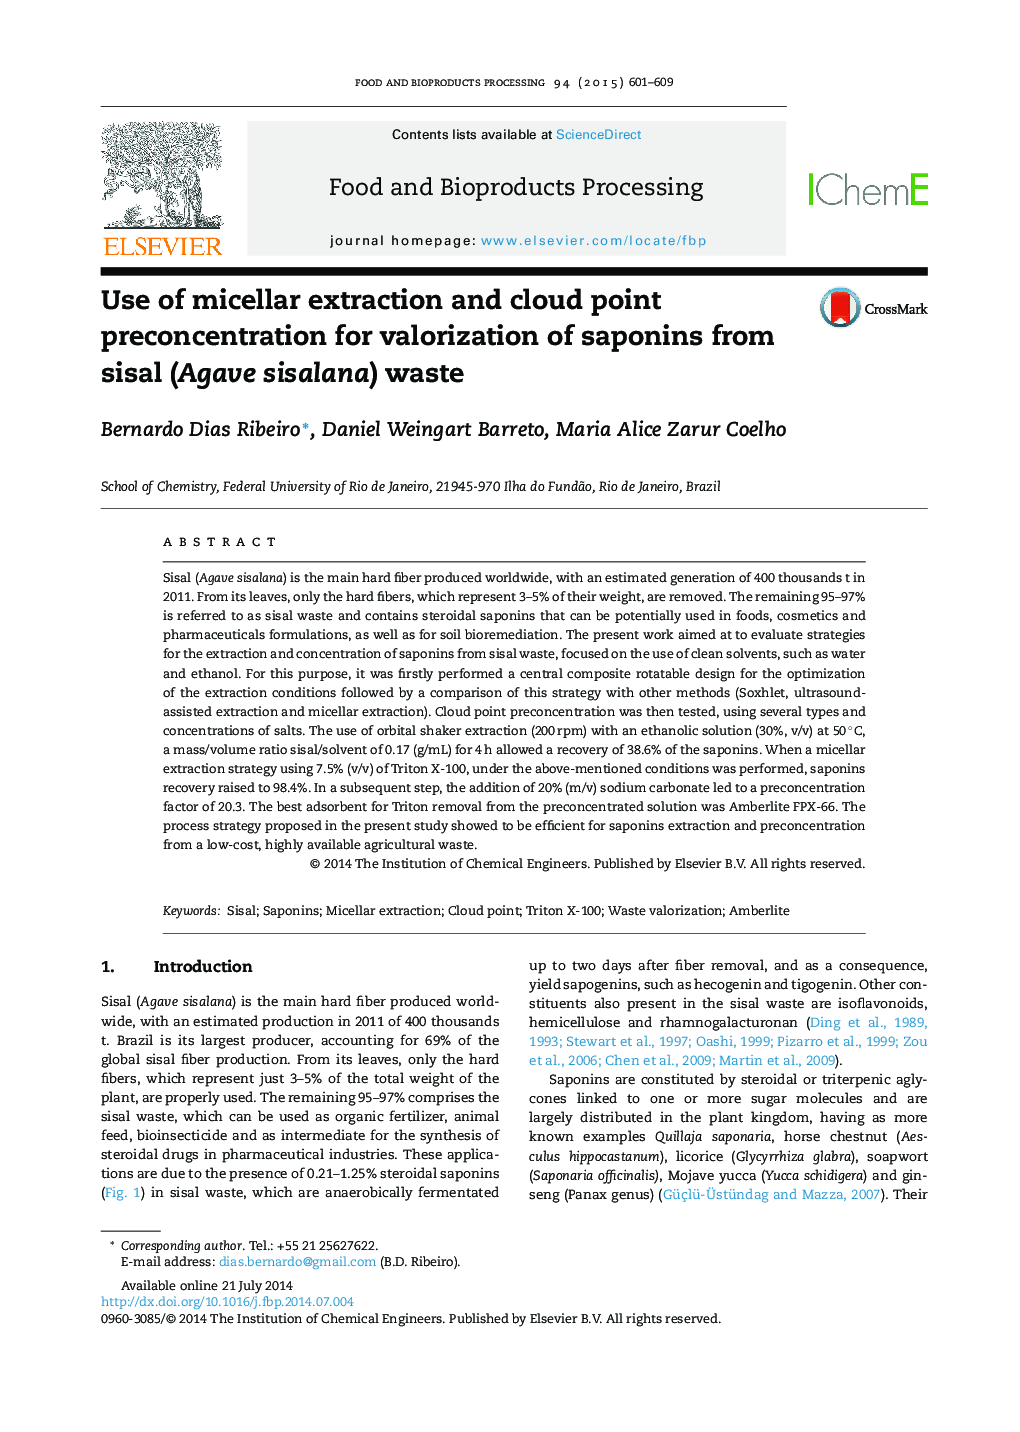 Use of micellar extraction and cloud point preconcentration for valorization of saponins from sisal (Agave sisalana) waste